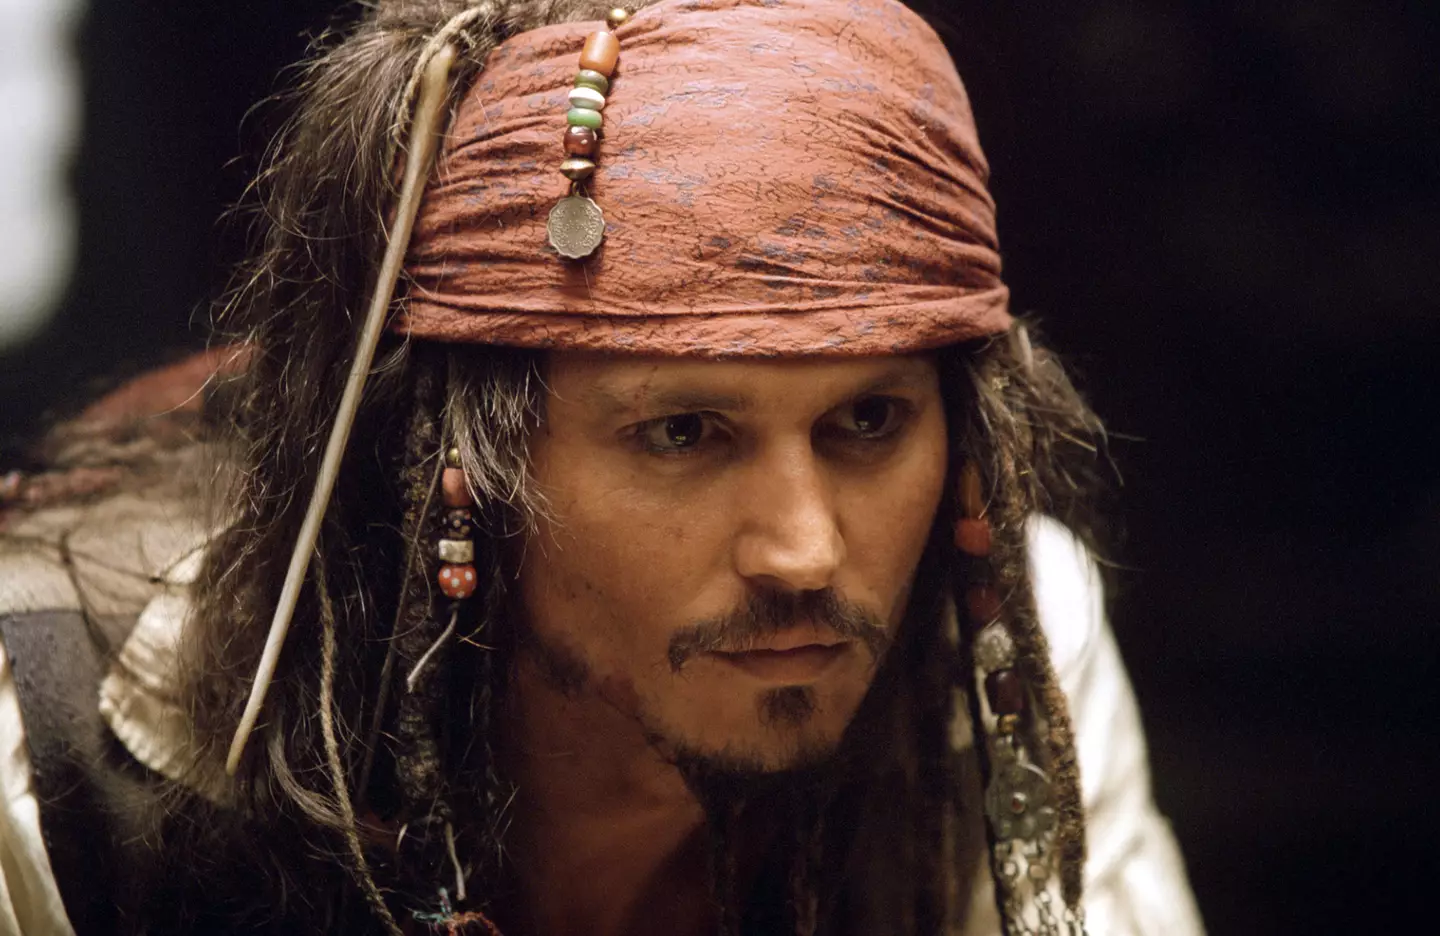 Johnny Depp starred in five Pirates of the Caribbean films.